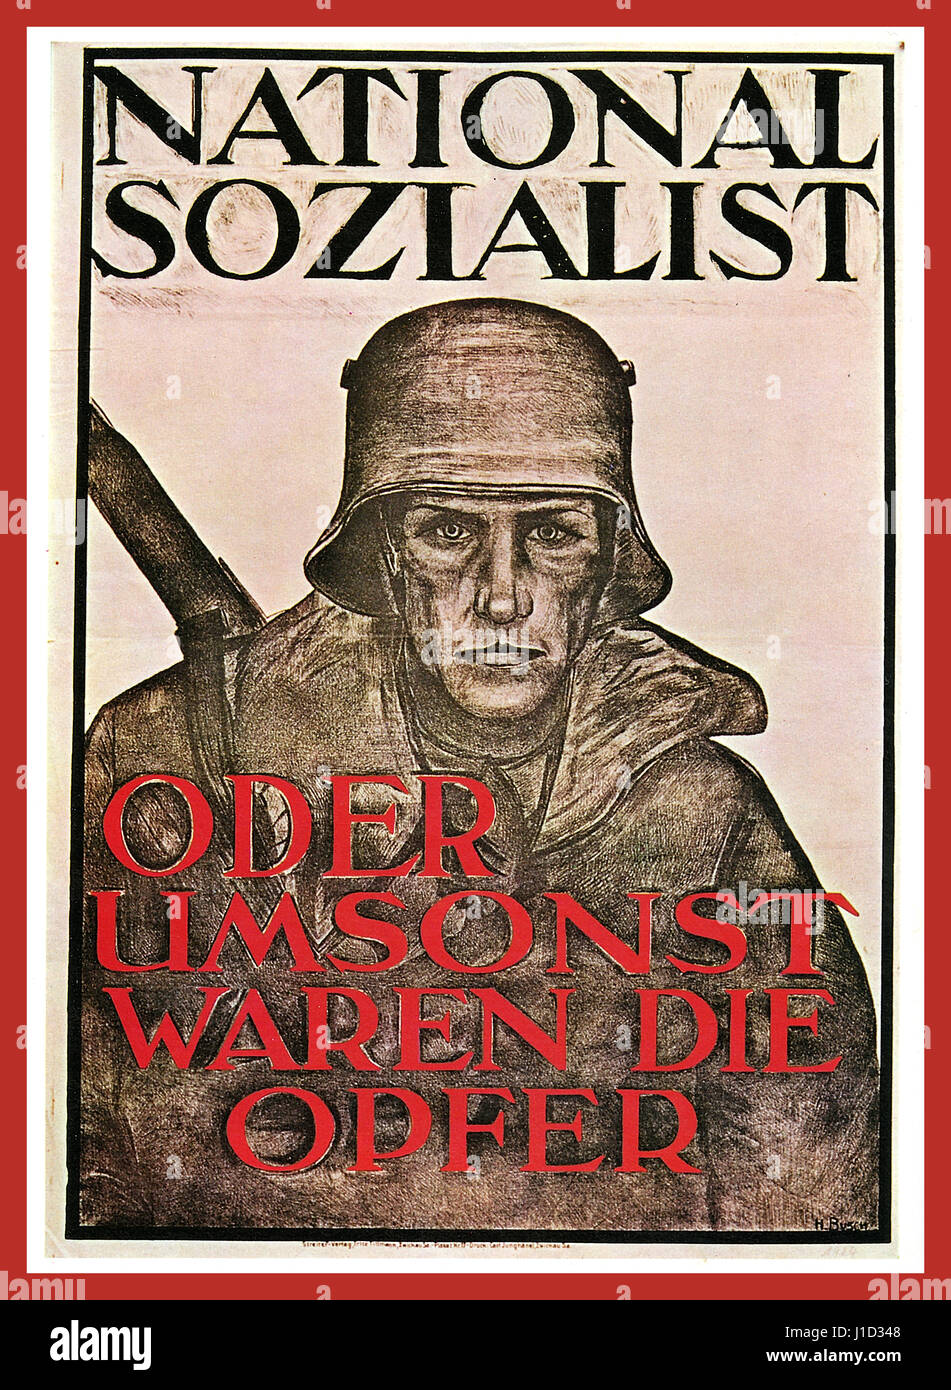 1930's National Socialist propaganda poster stating 'VOTE NATIONAL SOCIALIST-or the sacrifices will have been in vain' Stock Photo